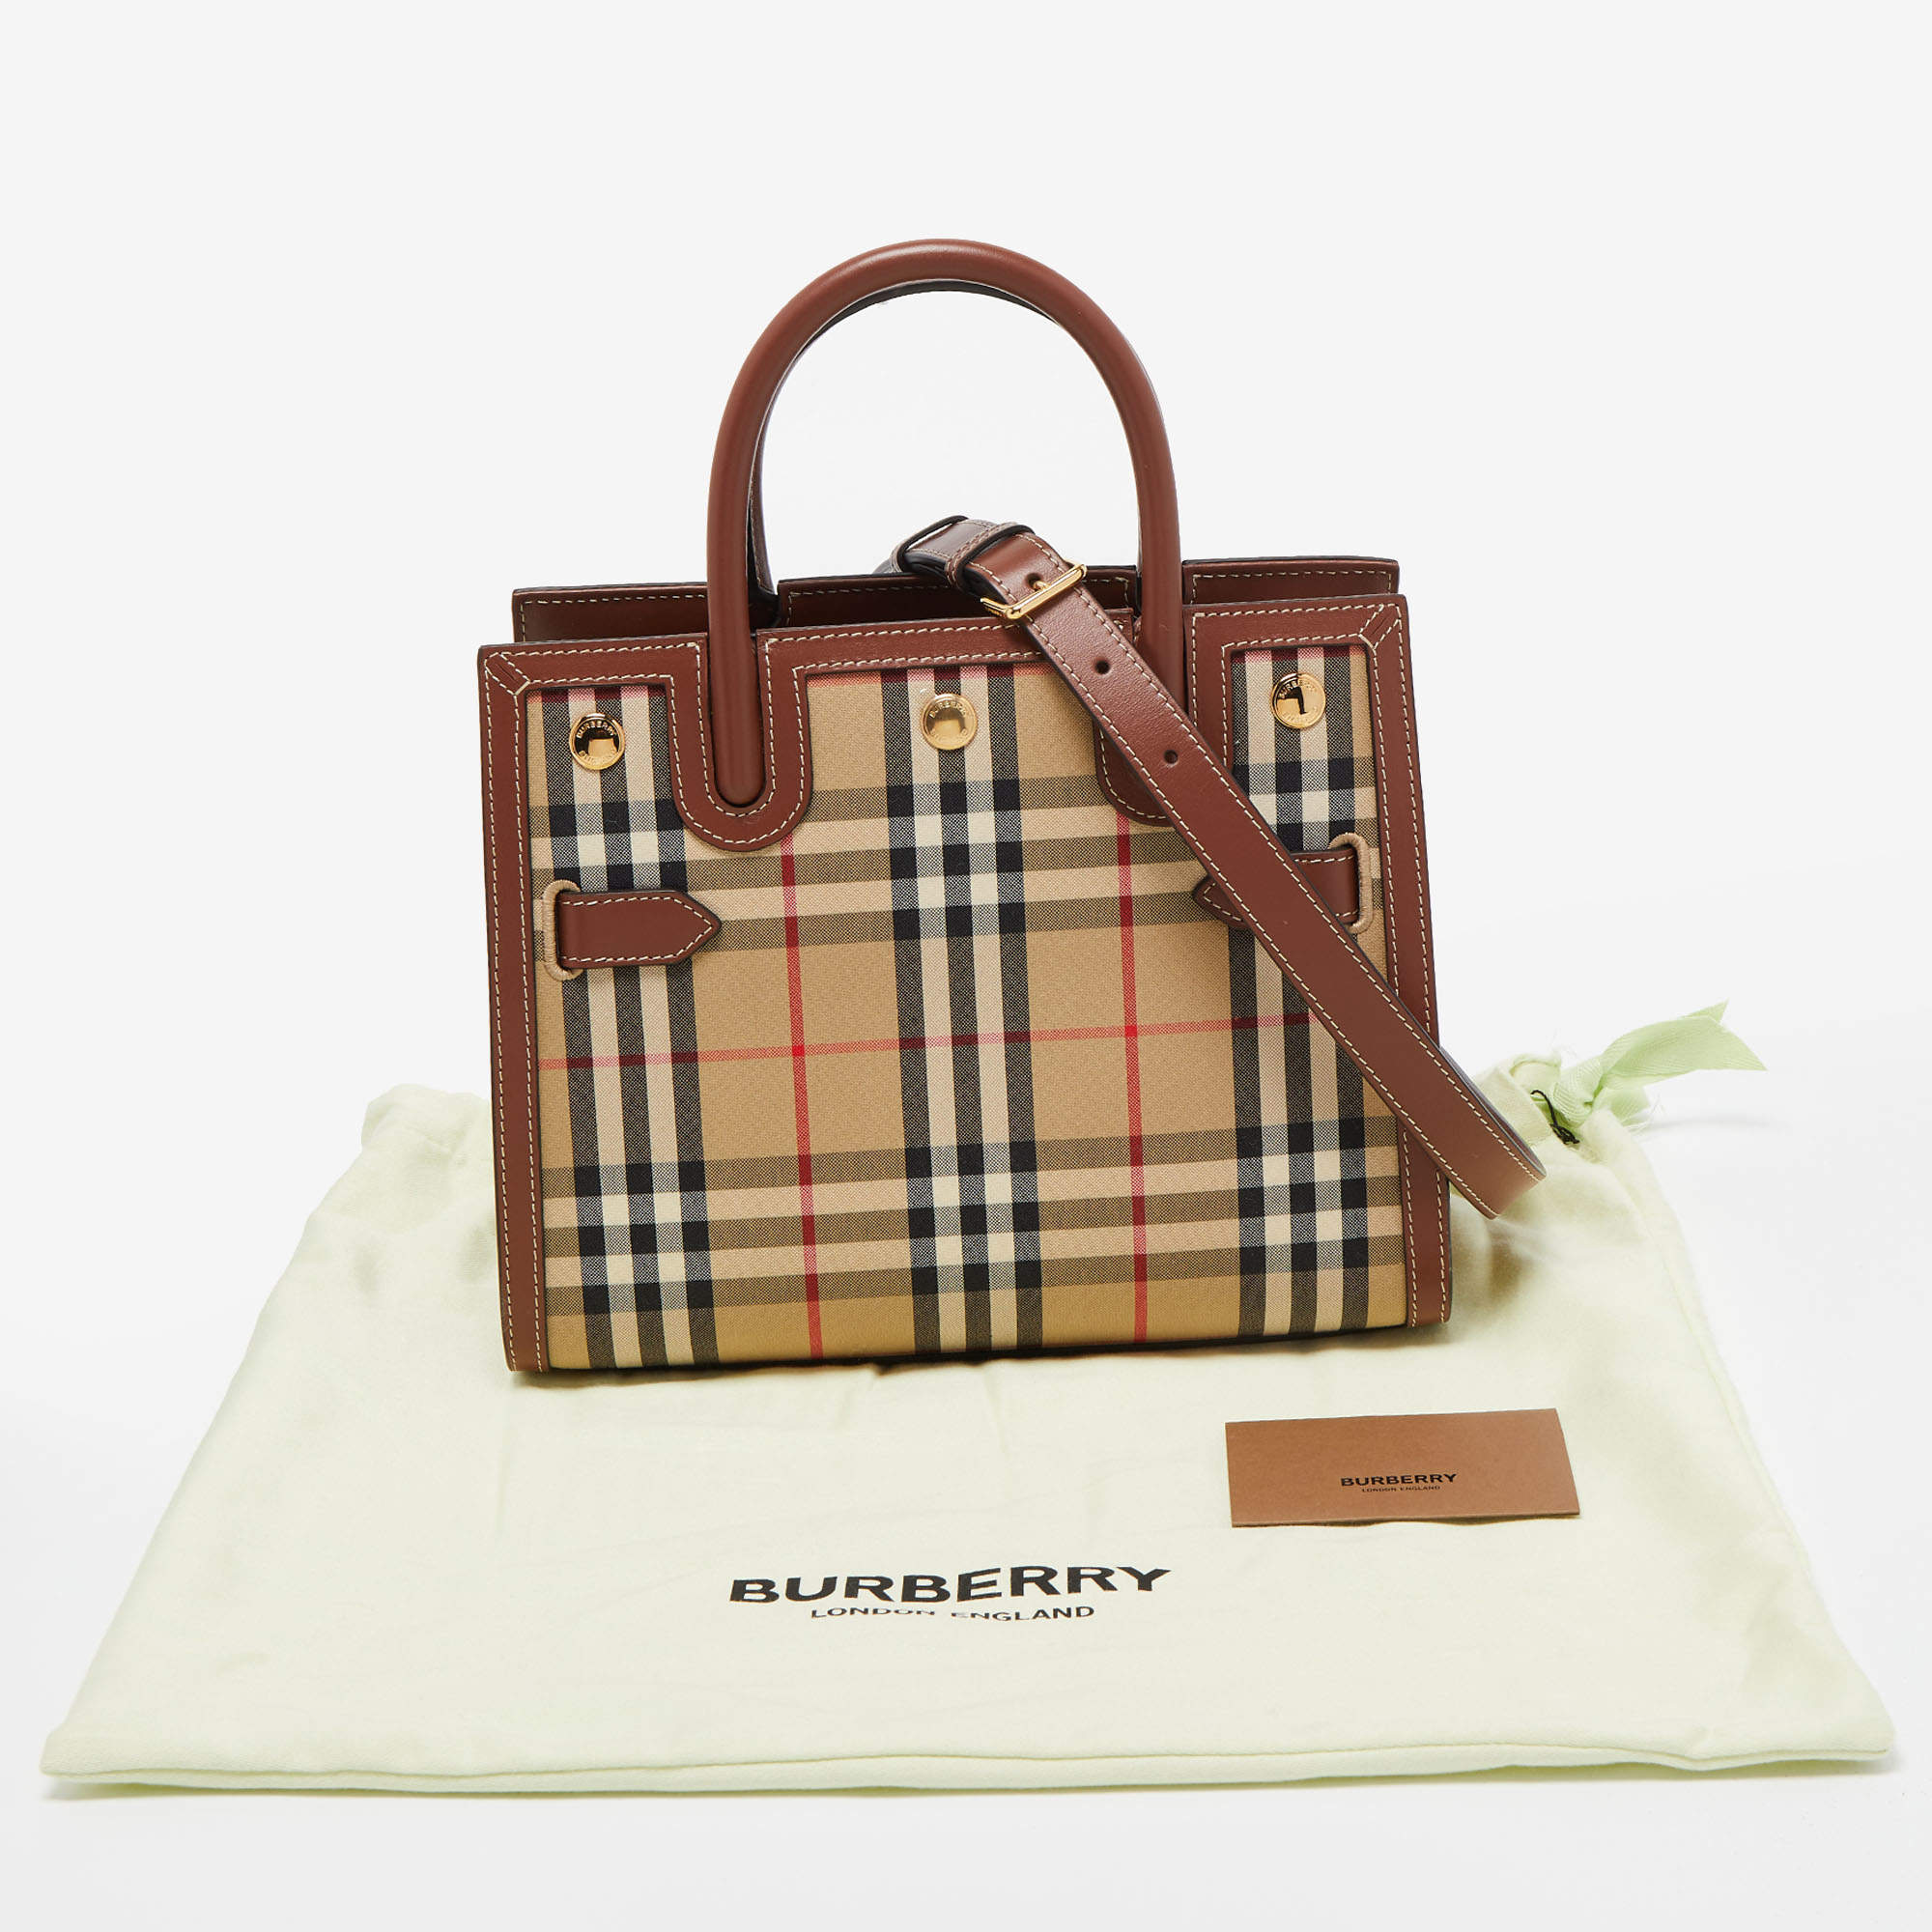 BURBERRY: TB bag in canvas and leather - Beige  Burberry mini bag 8070576  online at